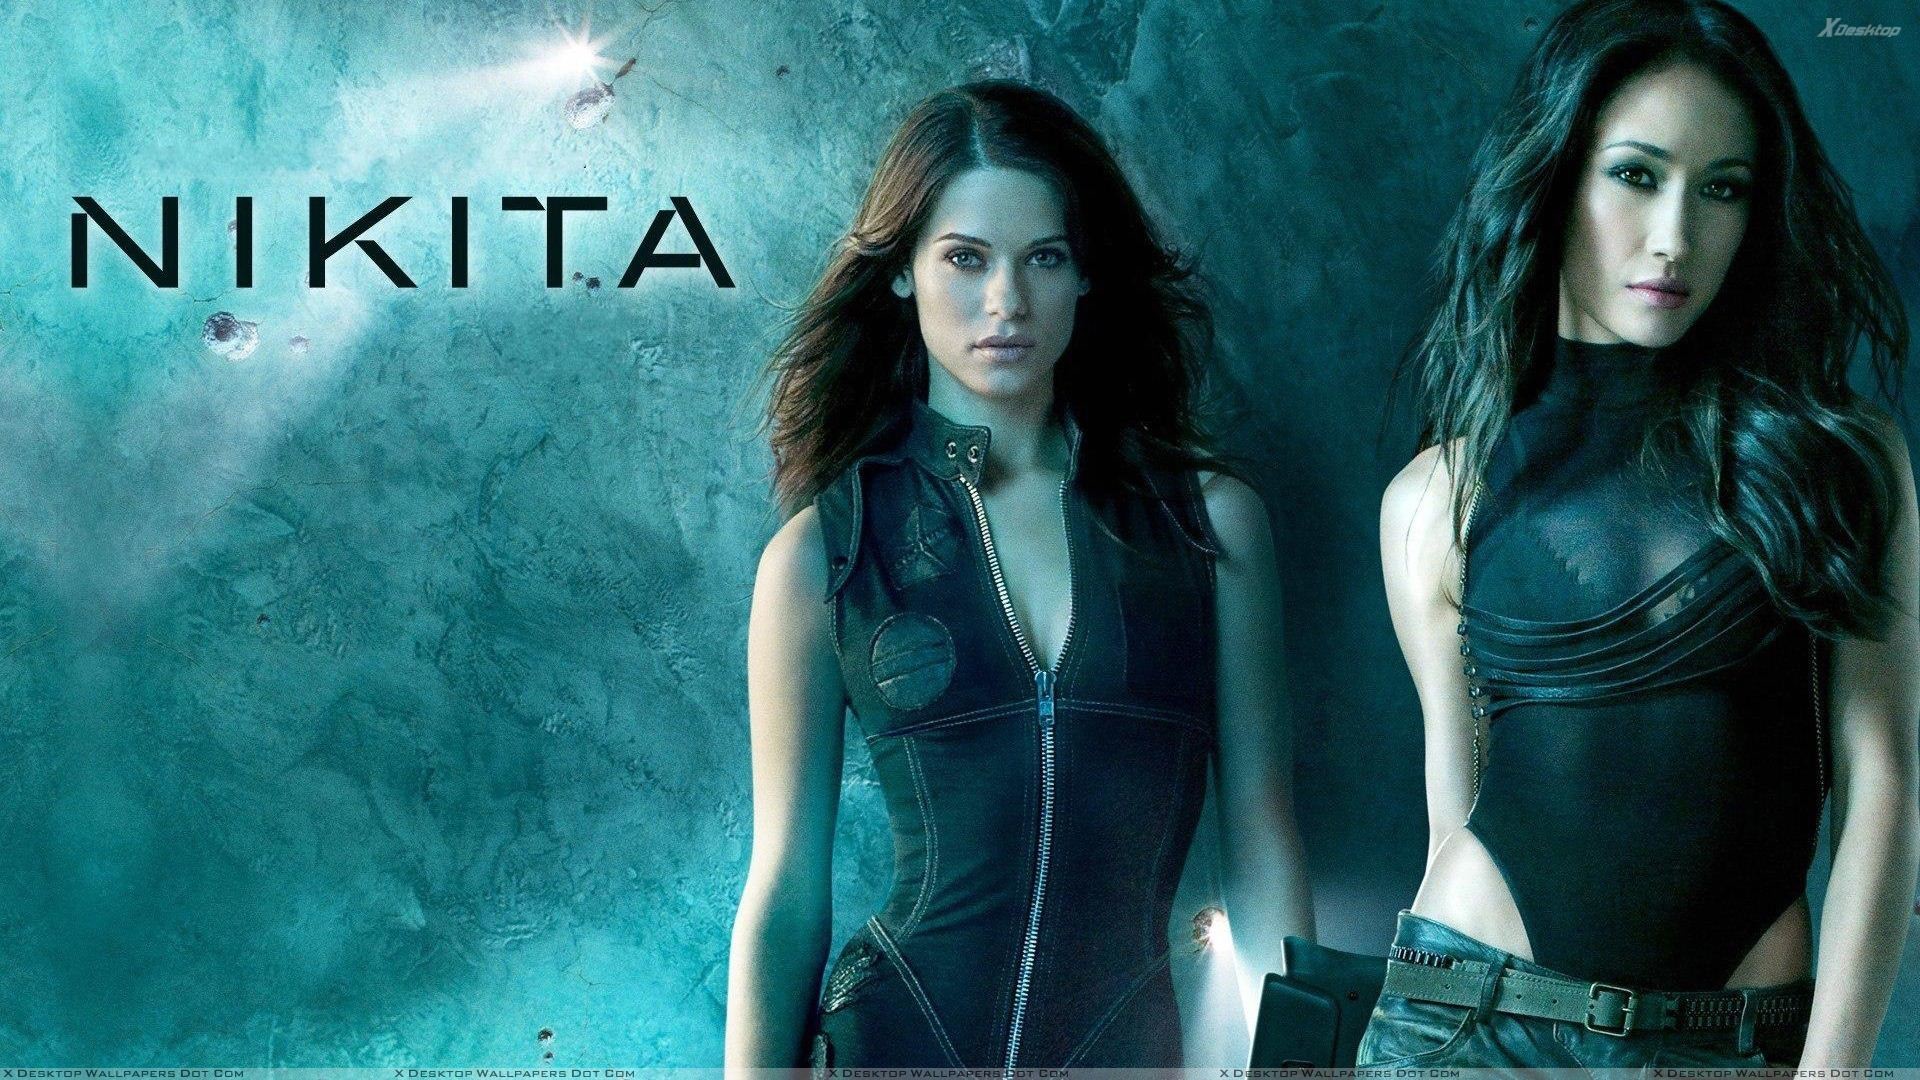 1920x1080 You are viewing wallpaper titled "Nikita – Maggie Q ...